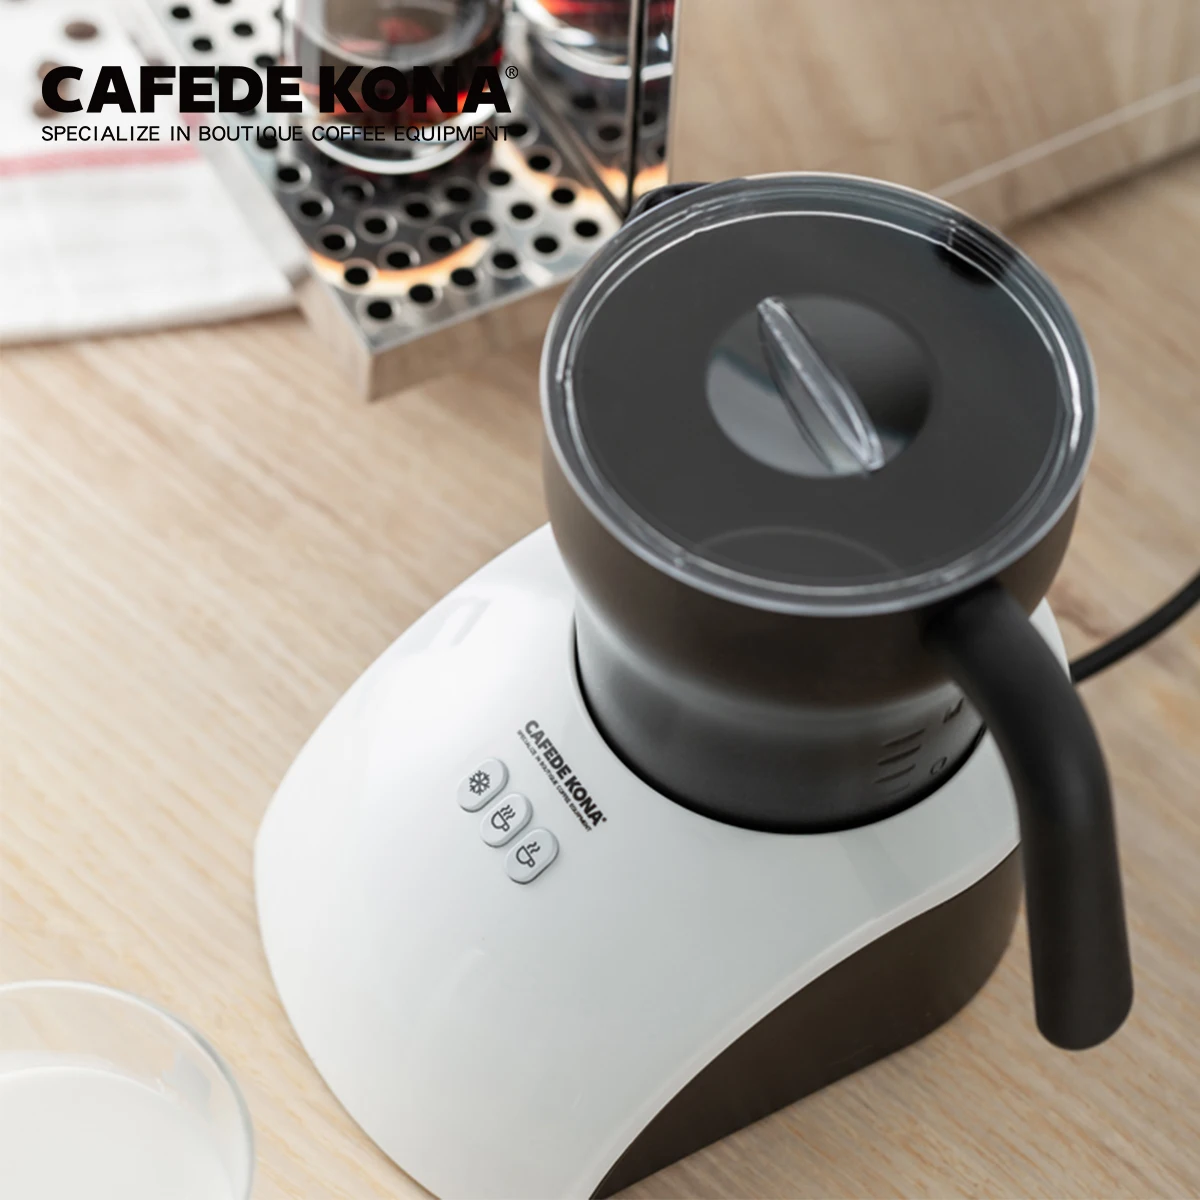 

Cafede KONA Automatic Frother Milk Pitcher Machine Steamer Electric Milk Frother Electric Milk Frother Stainless Steel 4 in 1